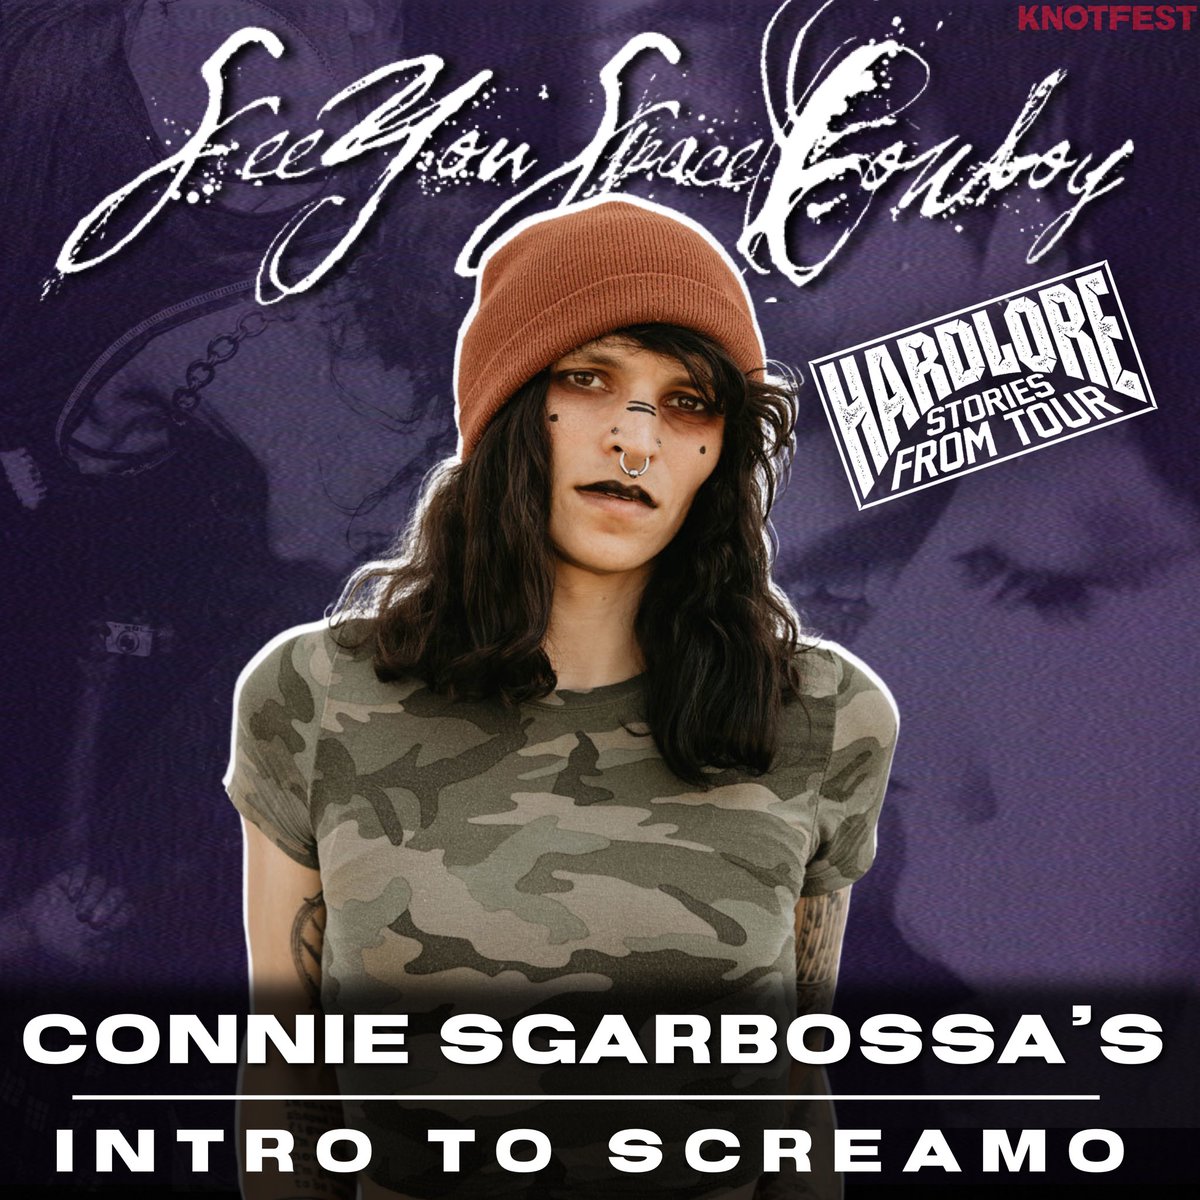 Connie Sgarbossa’s Intro to Screamo playlist, as discussed in our latest episode. open.spotify.com/playlist/2Vx1t… @camuslovechild @syscband